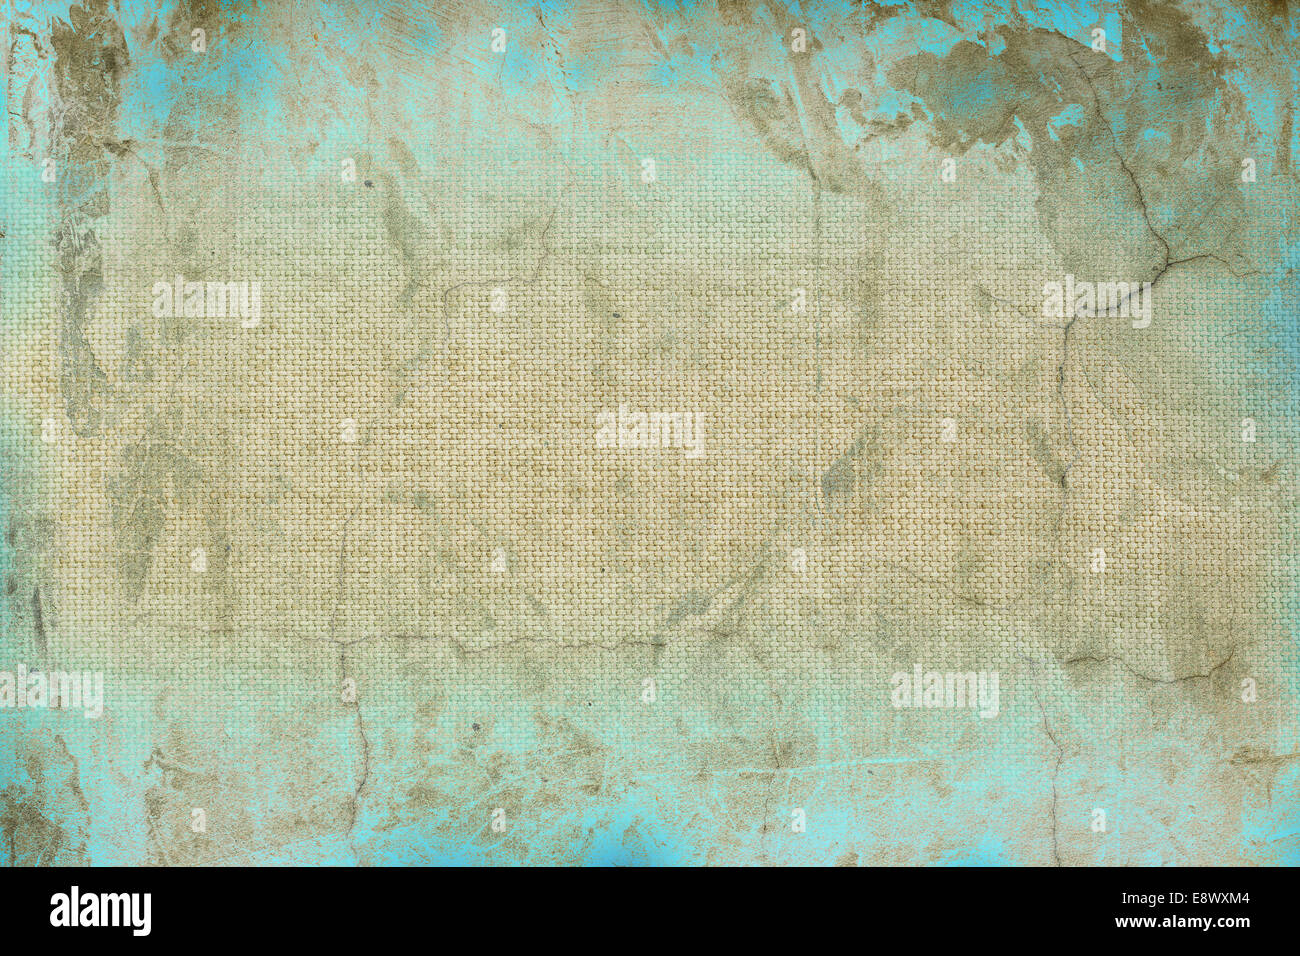 abstract grunge background Stock Photo